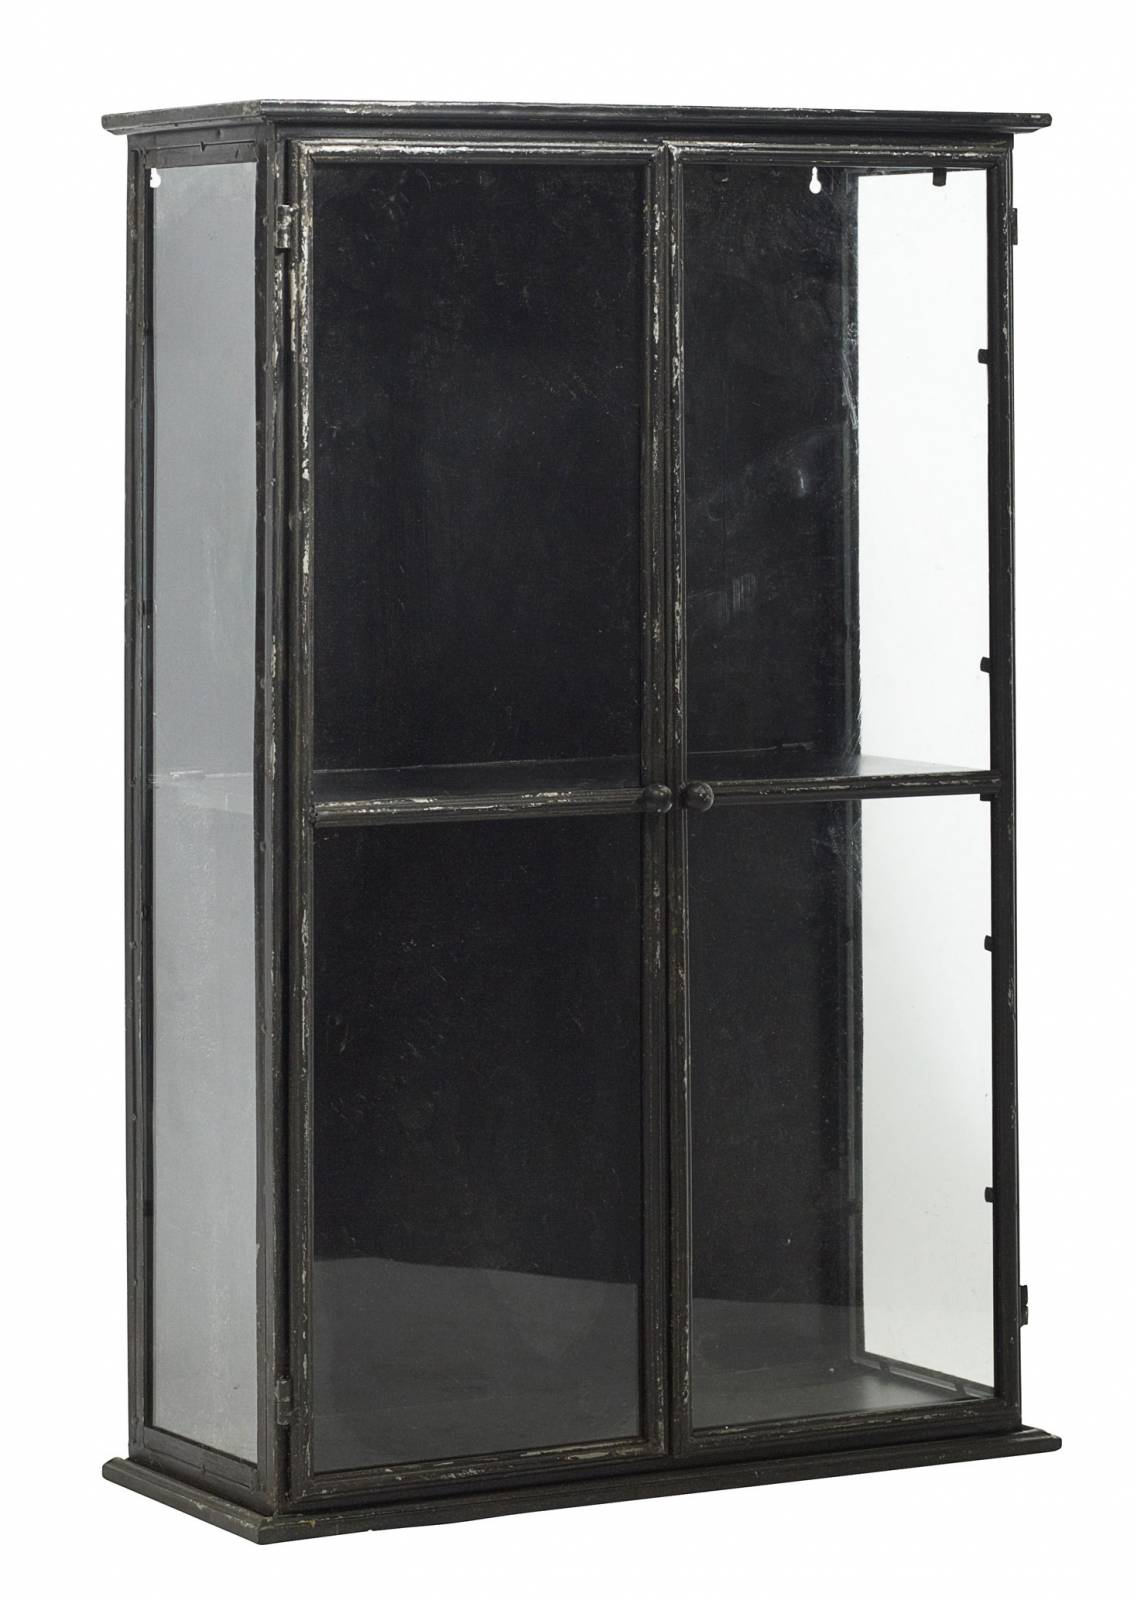 Large Black Glazed Metal Wall Cabinet With Glass 54x23x81cm thumbnails